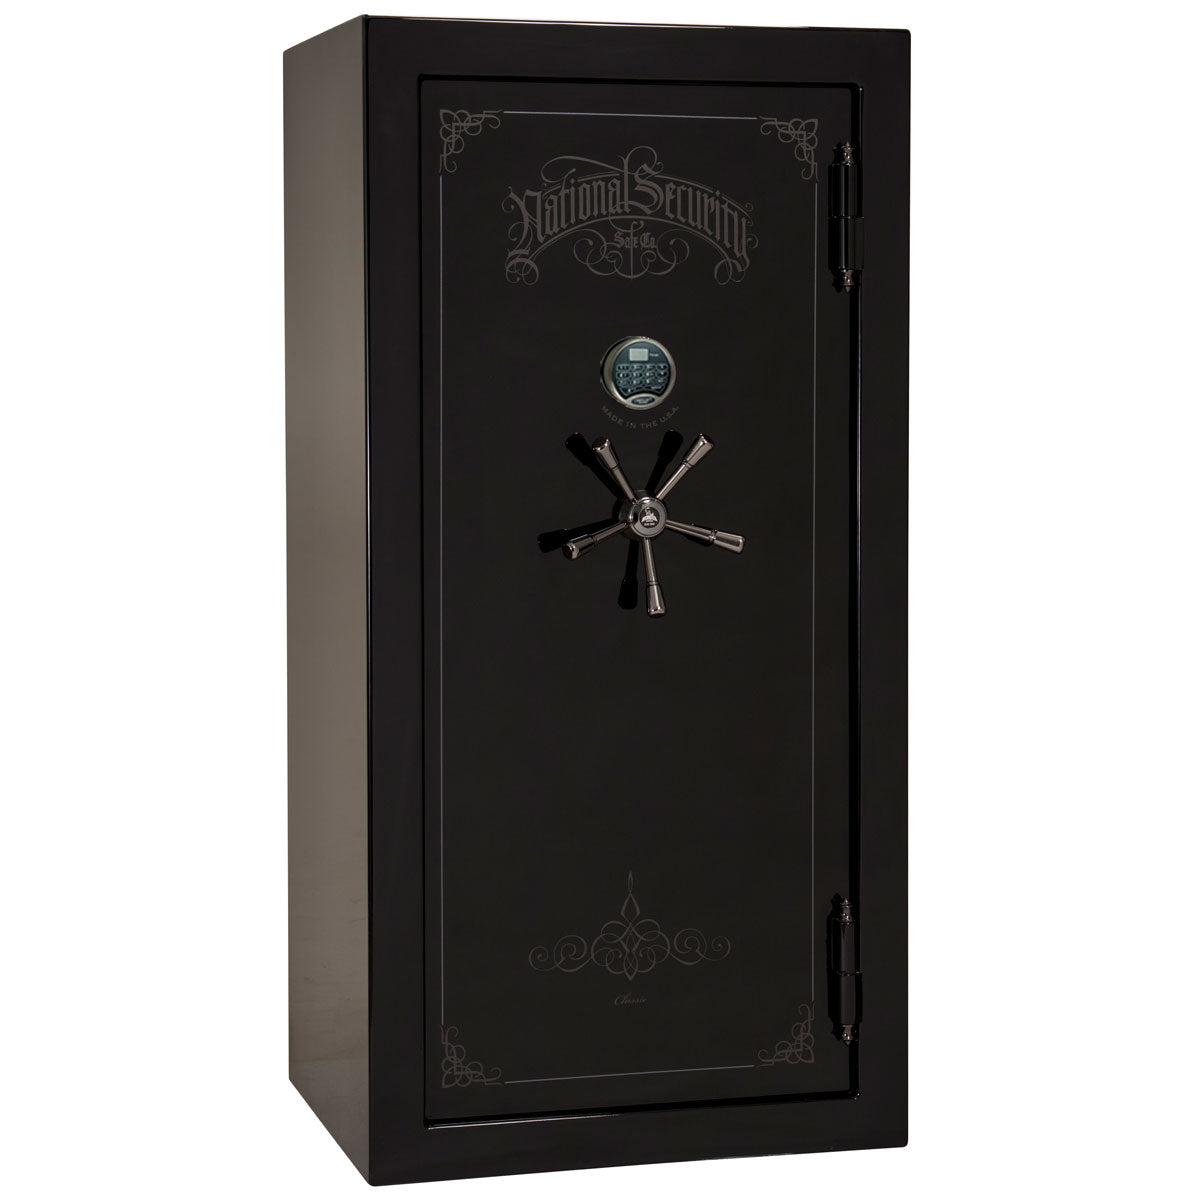 Liberty Safe Classic Plus 25 in Black Gloss with Black Chrome Electronic Lock, closed door.